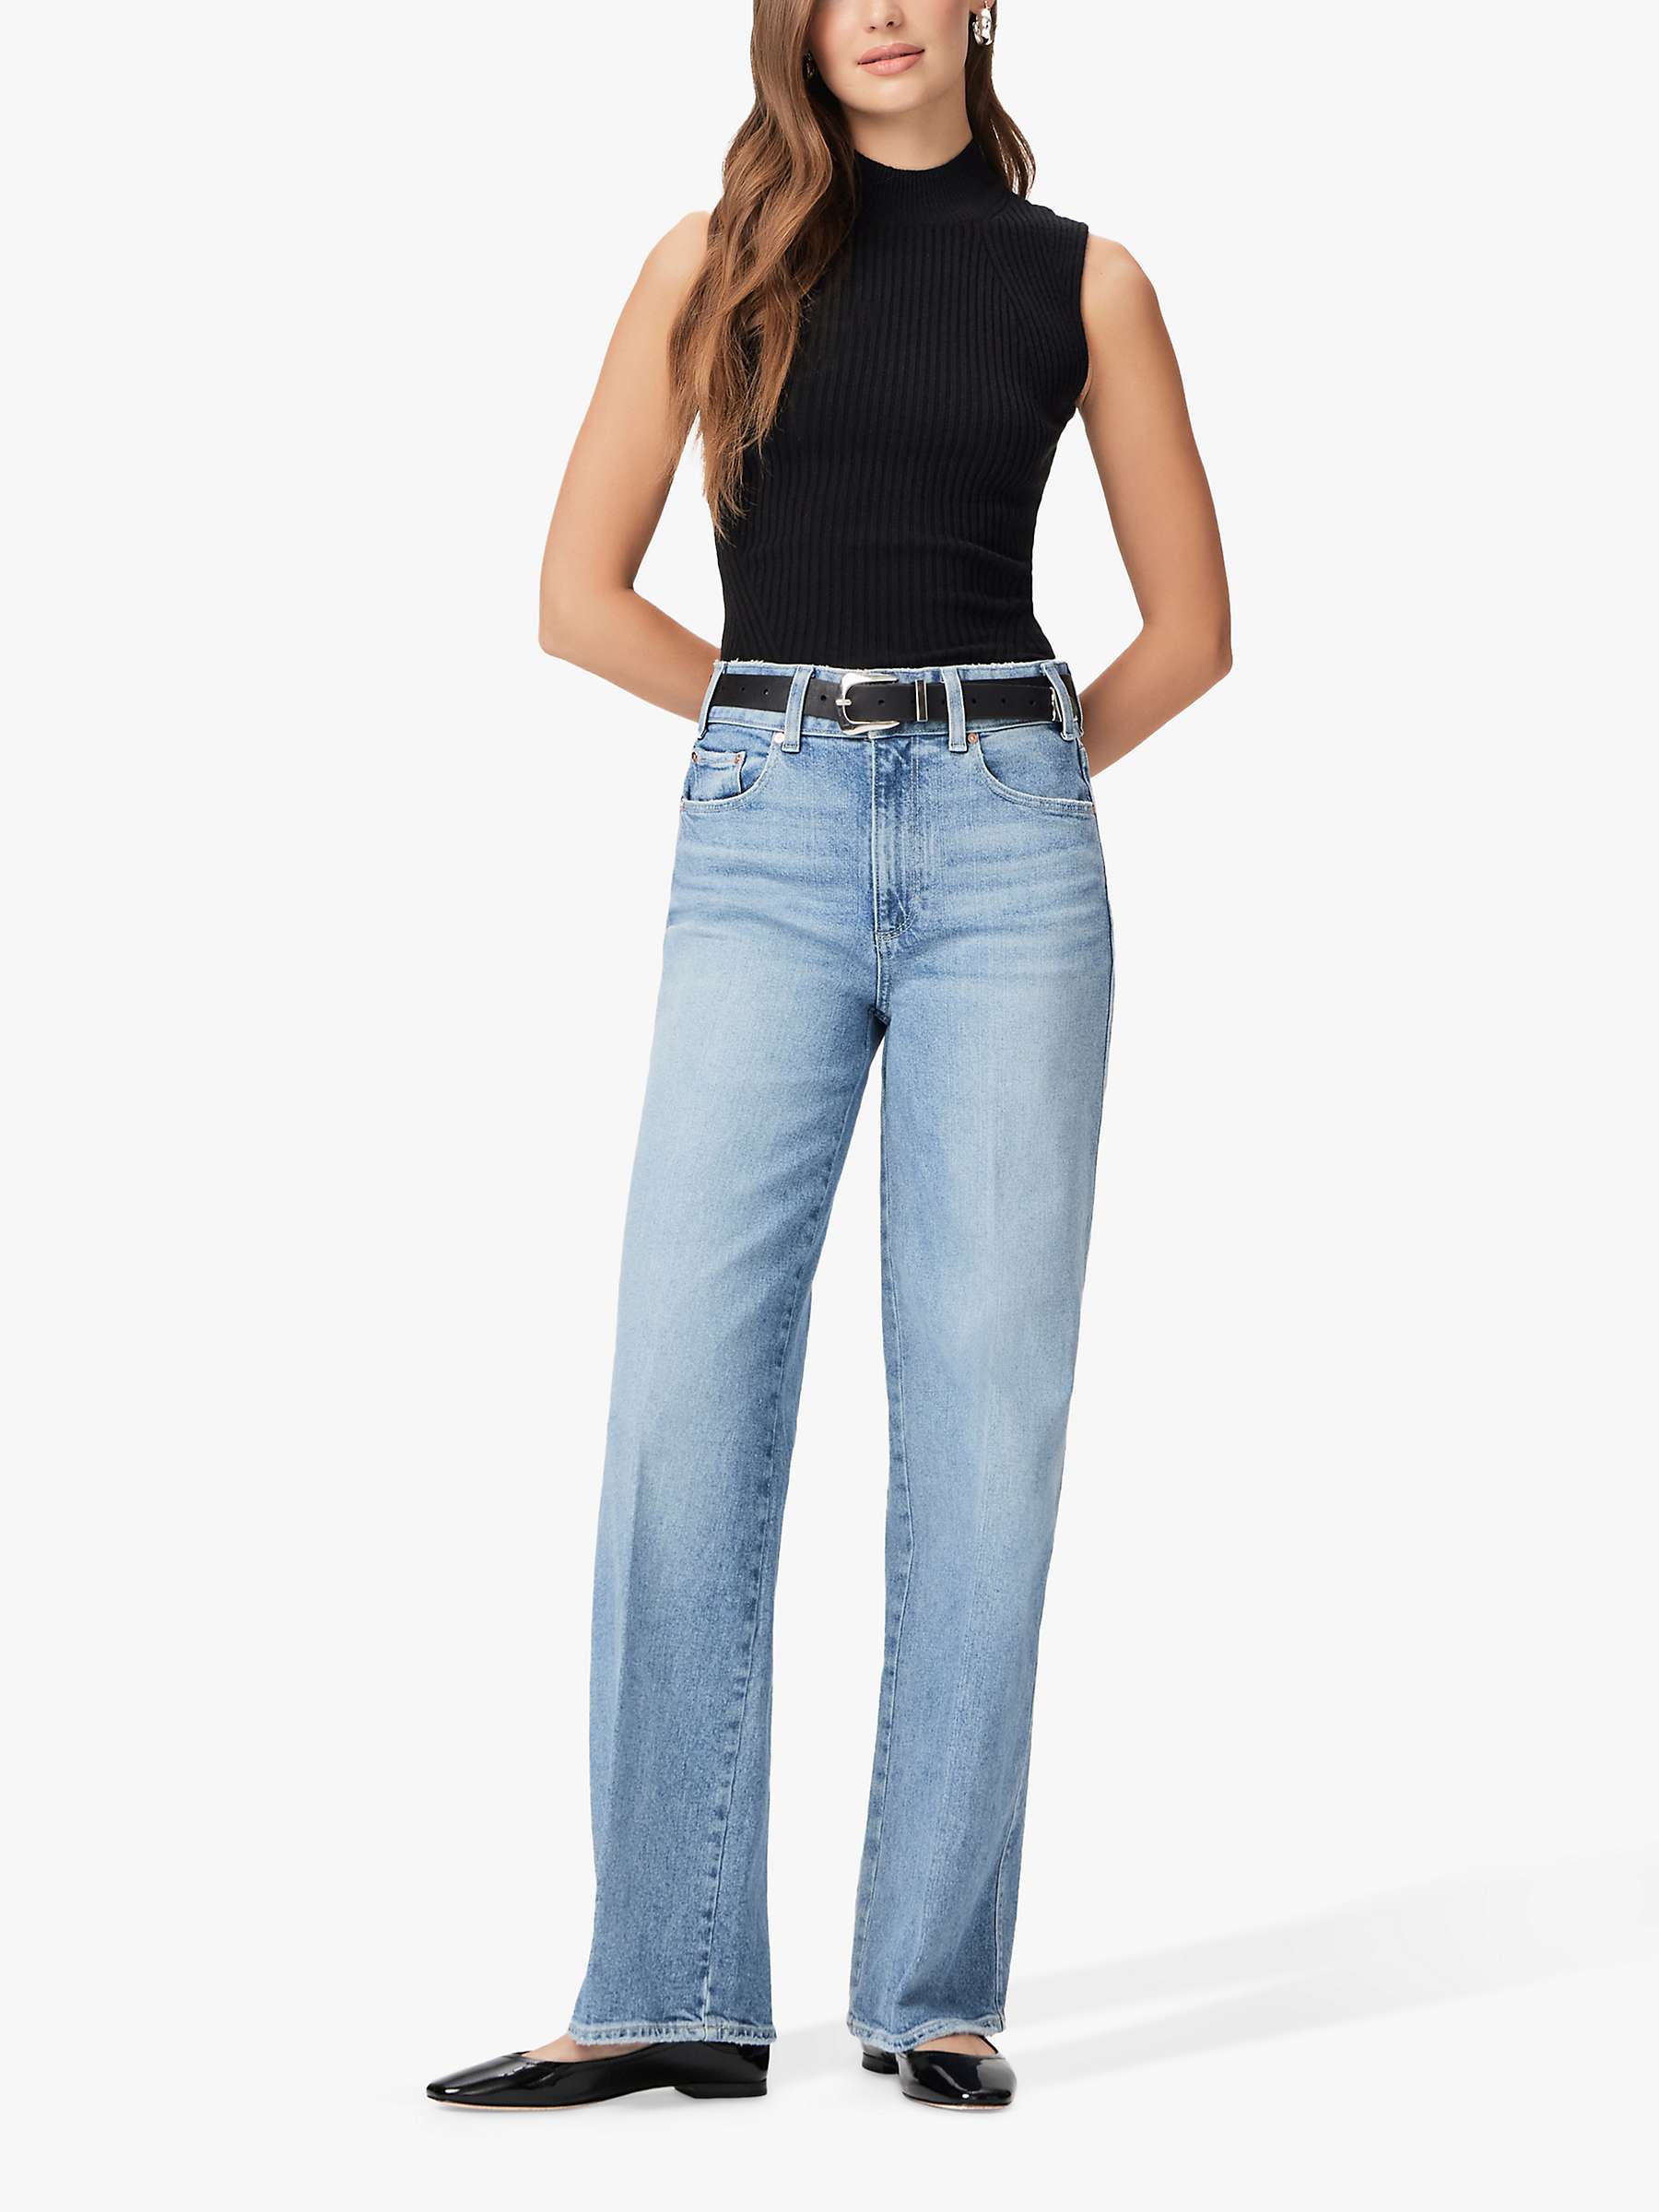 Buy PAIGE Sasha High Rise Straight Cut Jeans, Khristen Distressed Online at johnlewis.com